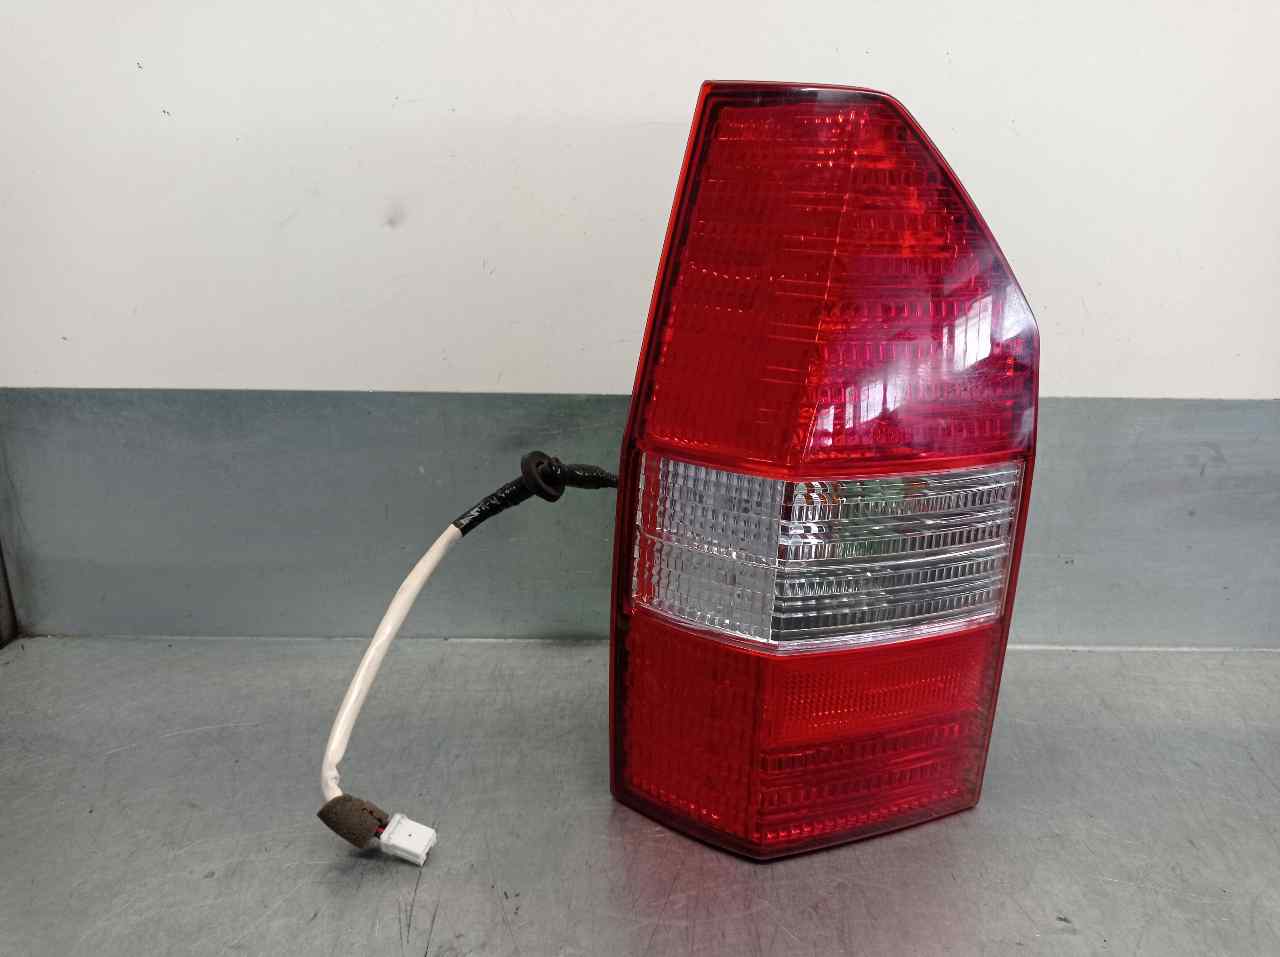 MITSUBISHI Space Wagon 3 generation (1998-2004) Rear Right Taillight Lamp MR465608, 5PUERTAS 19804111